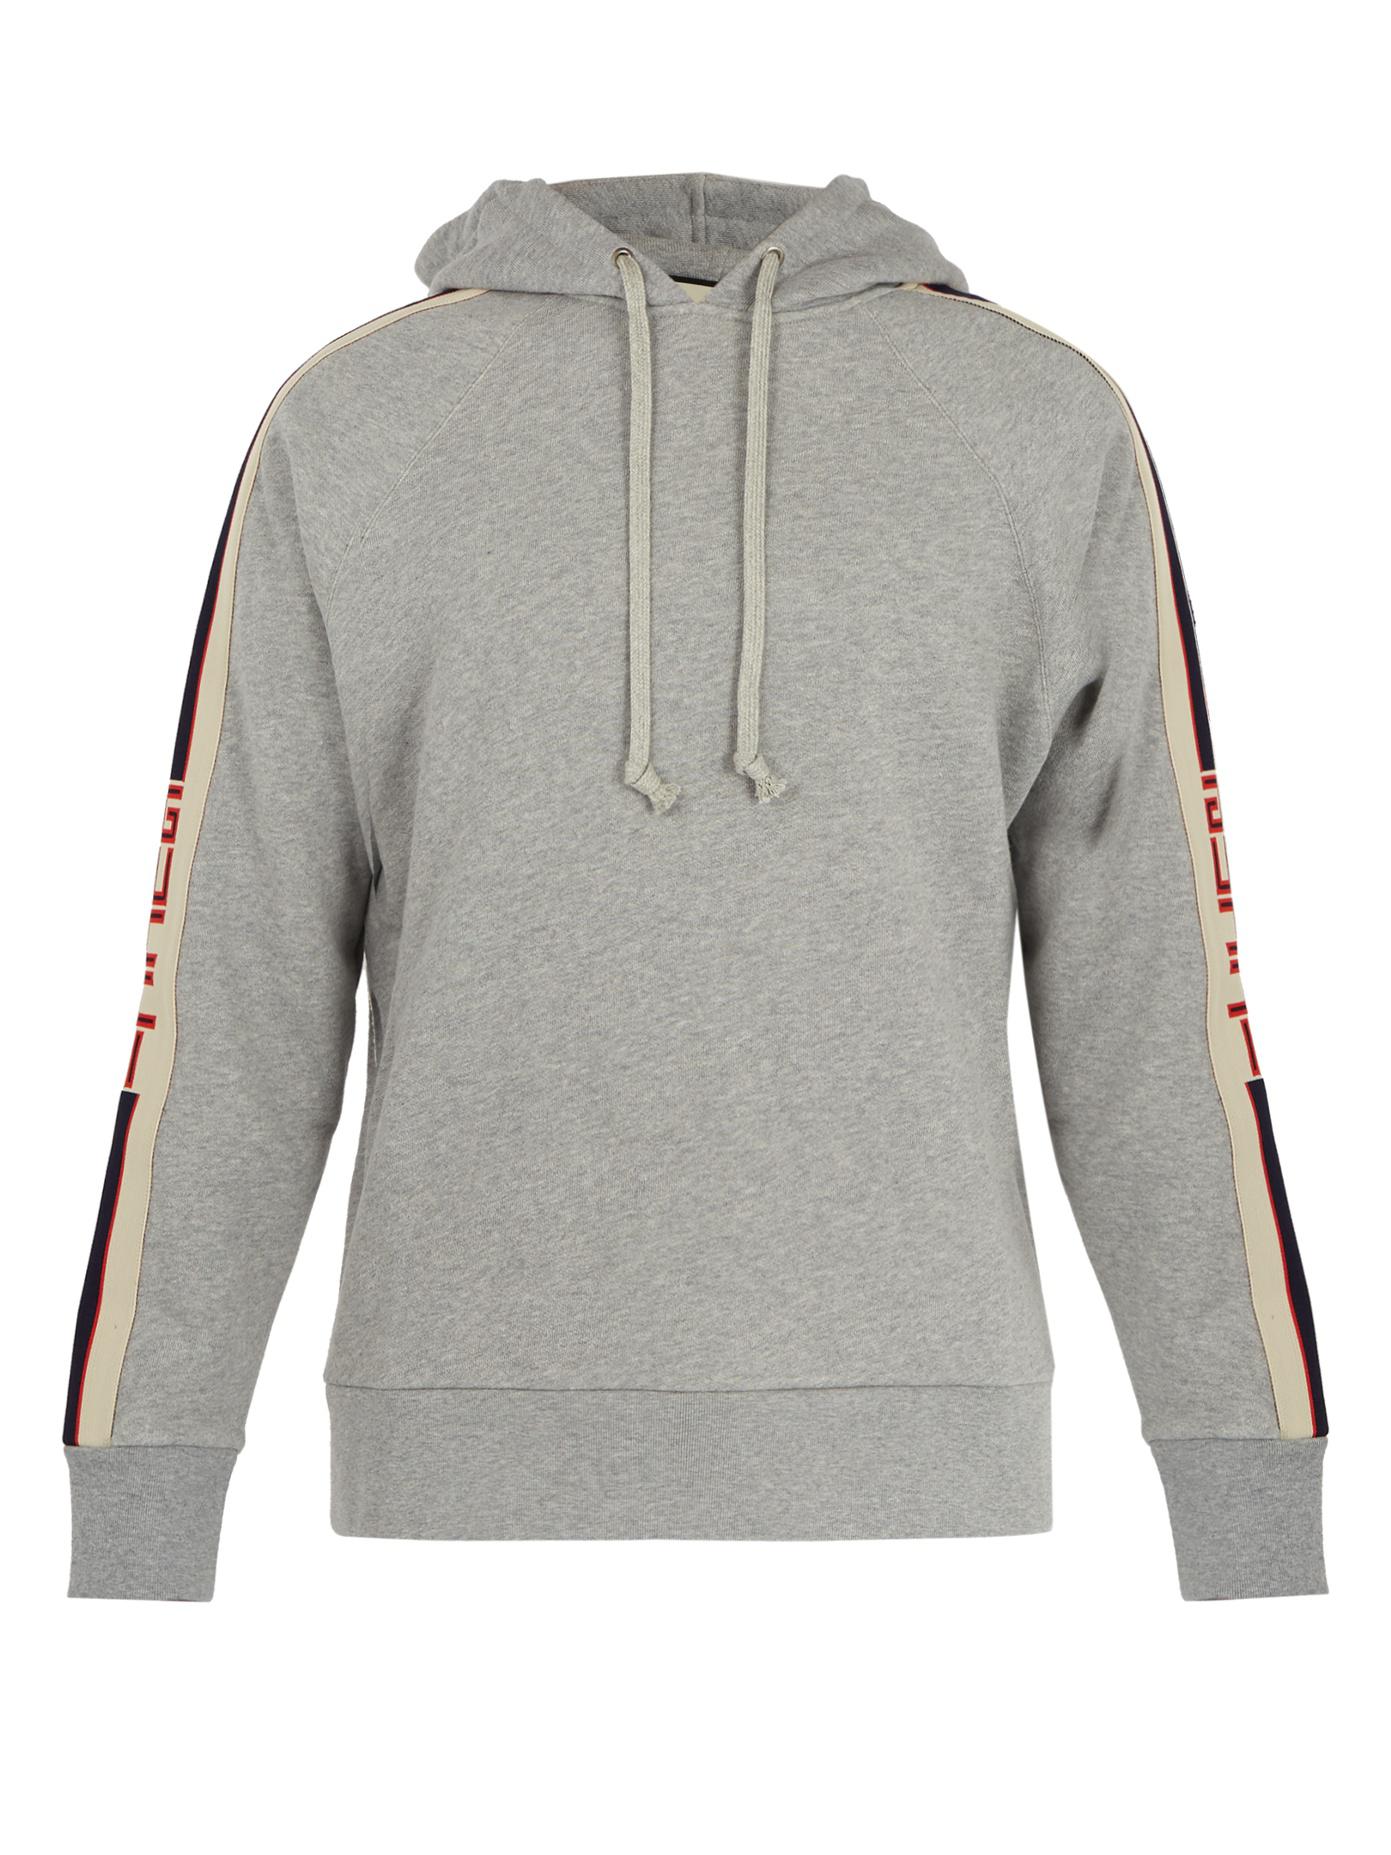 Lyst - Gucci Logo-jacquard Hooded Cotton Sweatshirt in Gray for Men